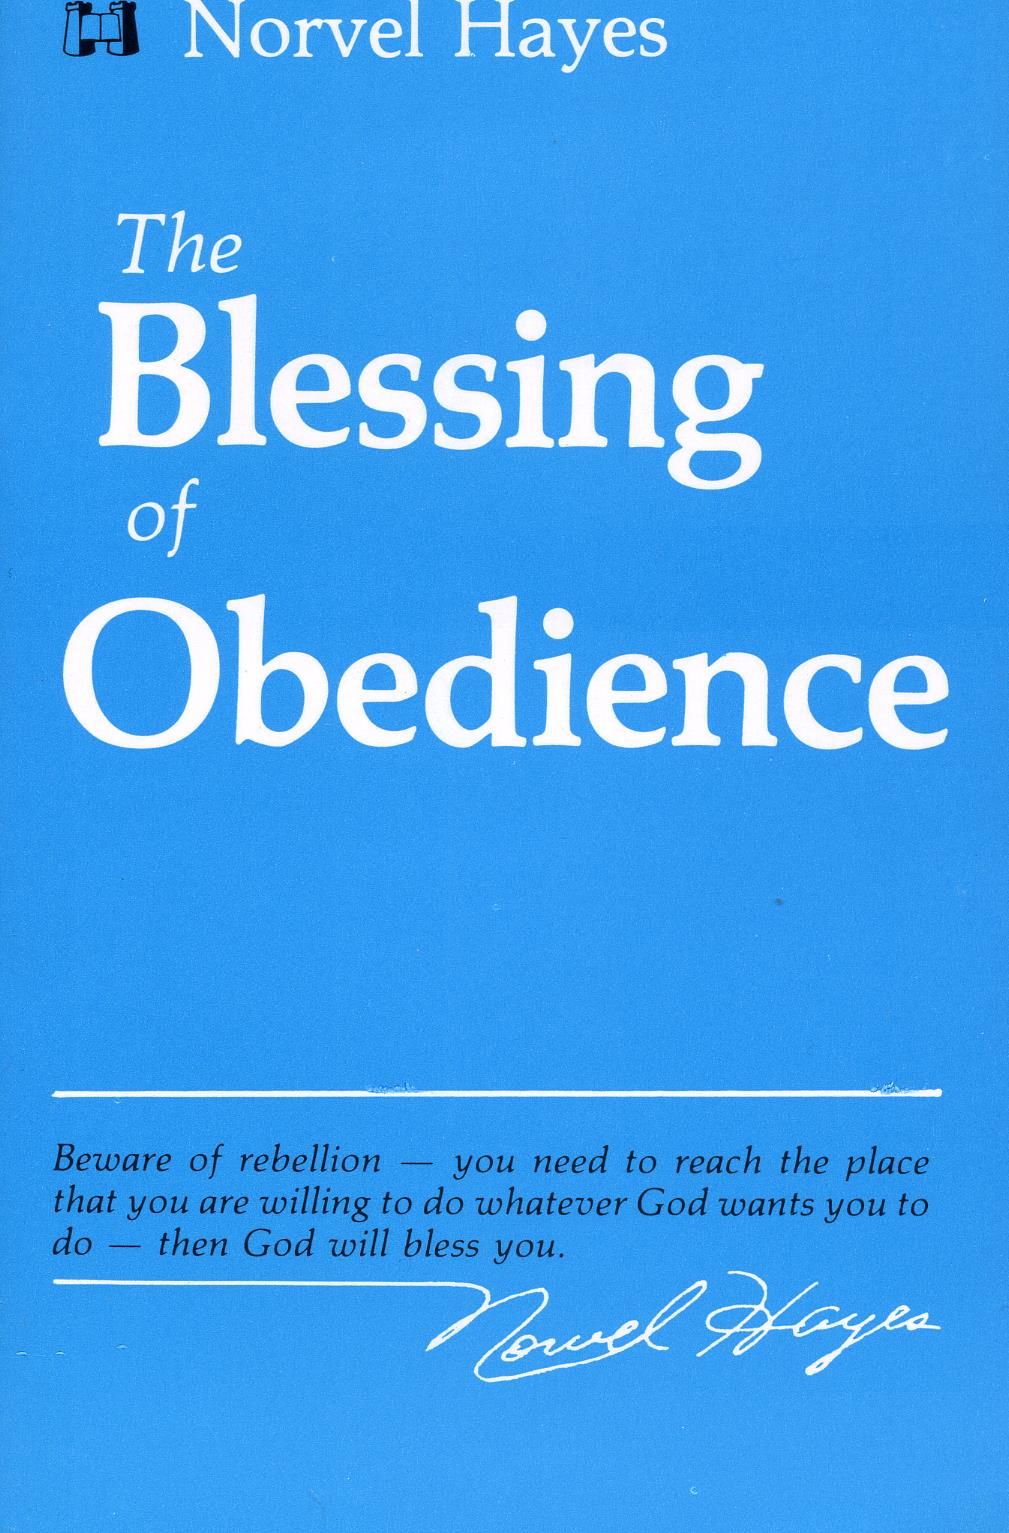 N. Hayes: The Blessing of Obedience